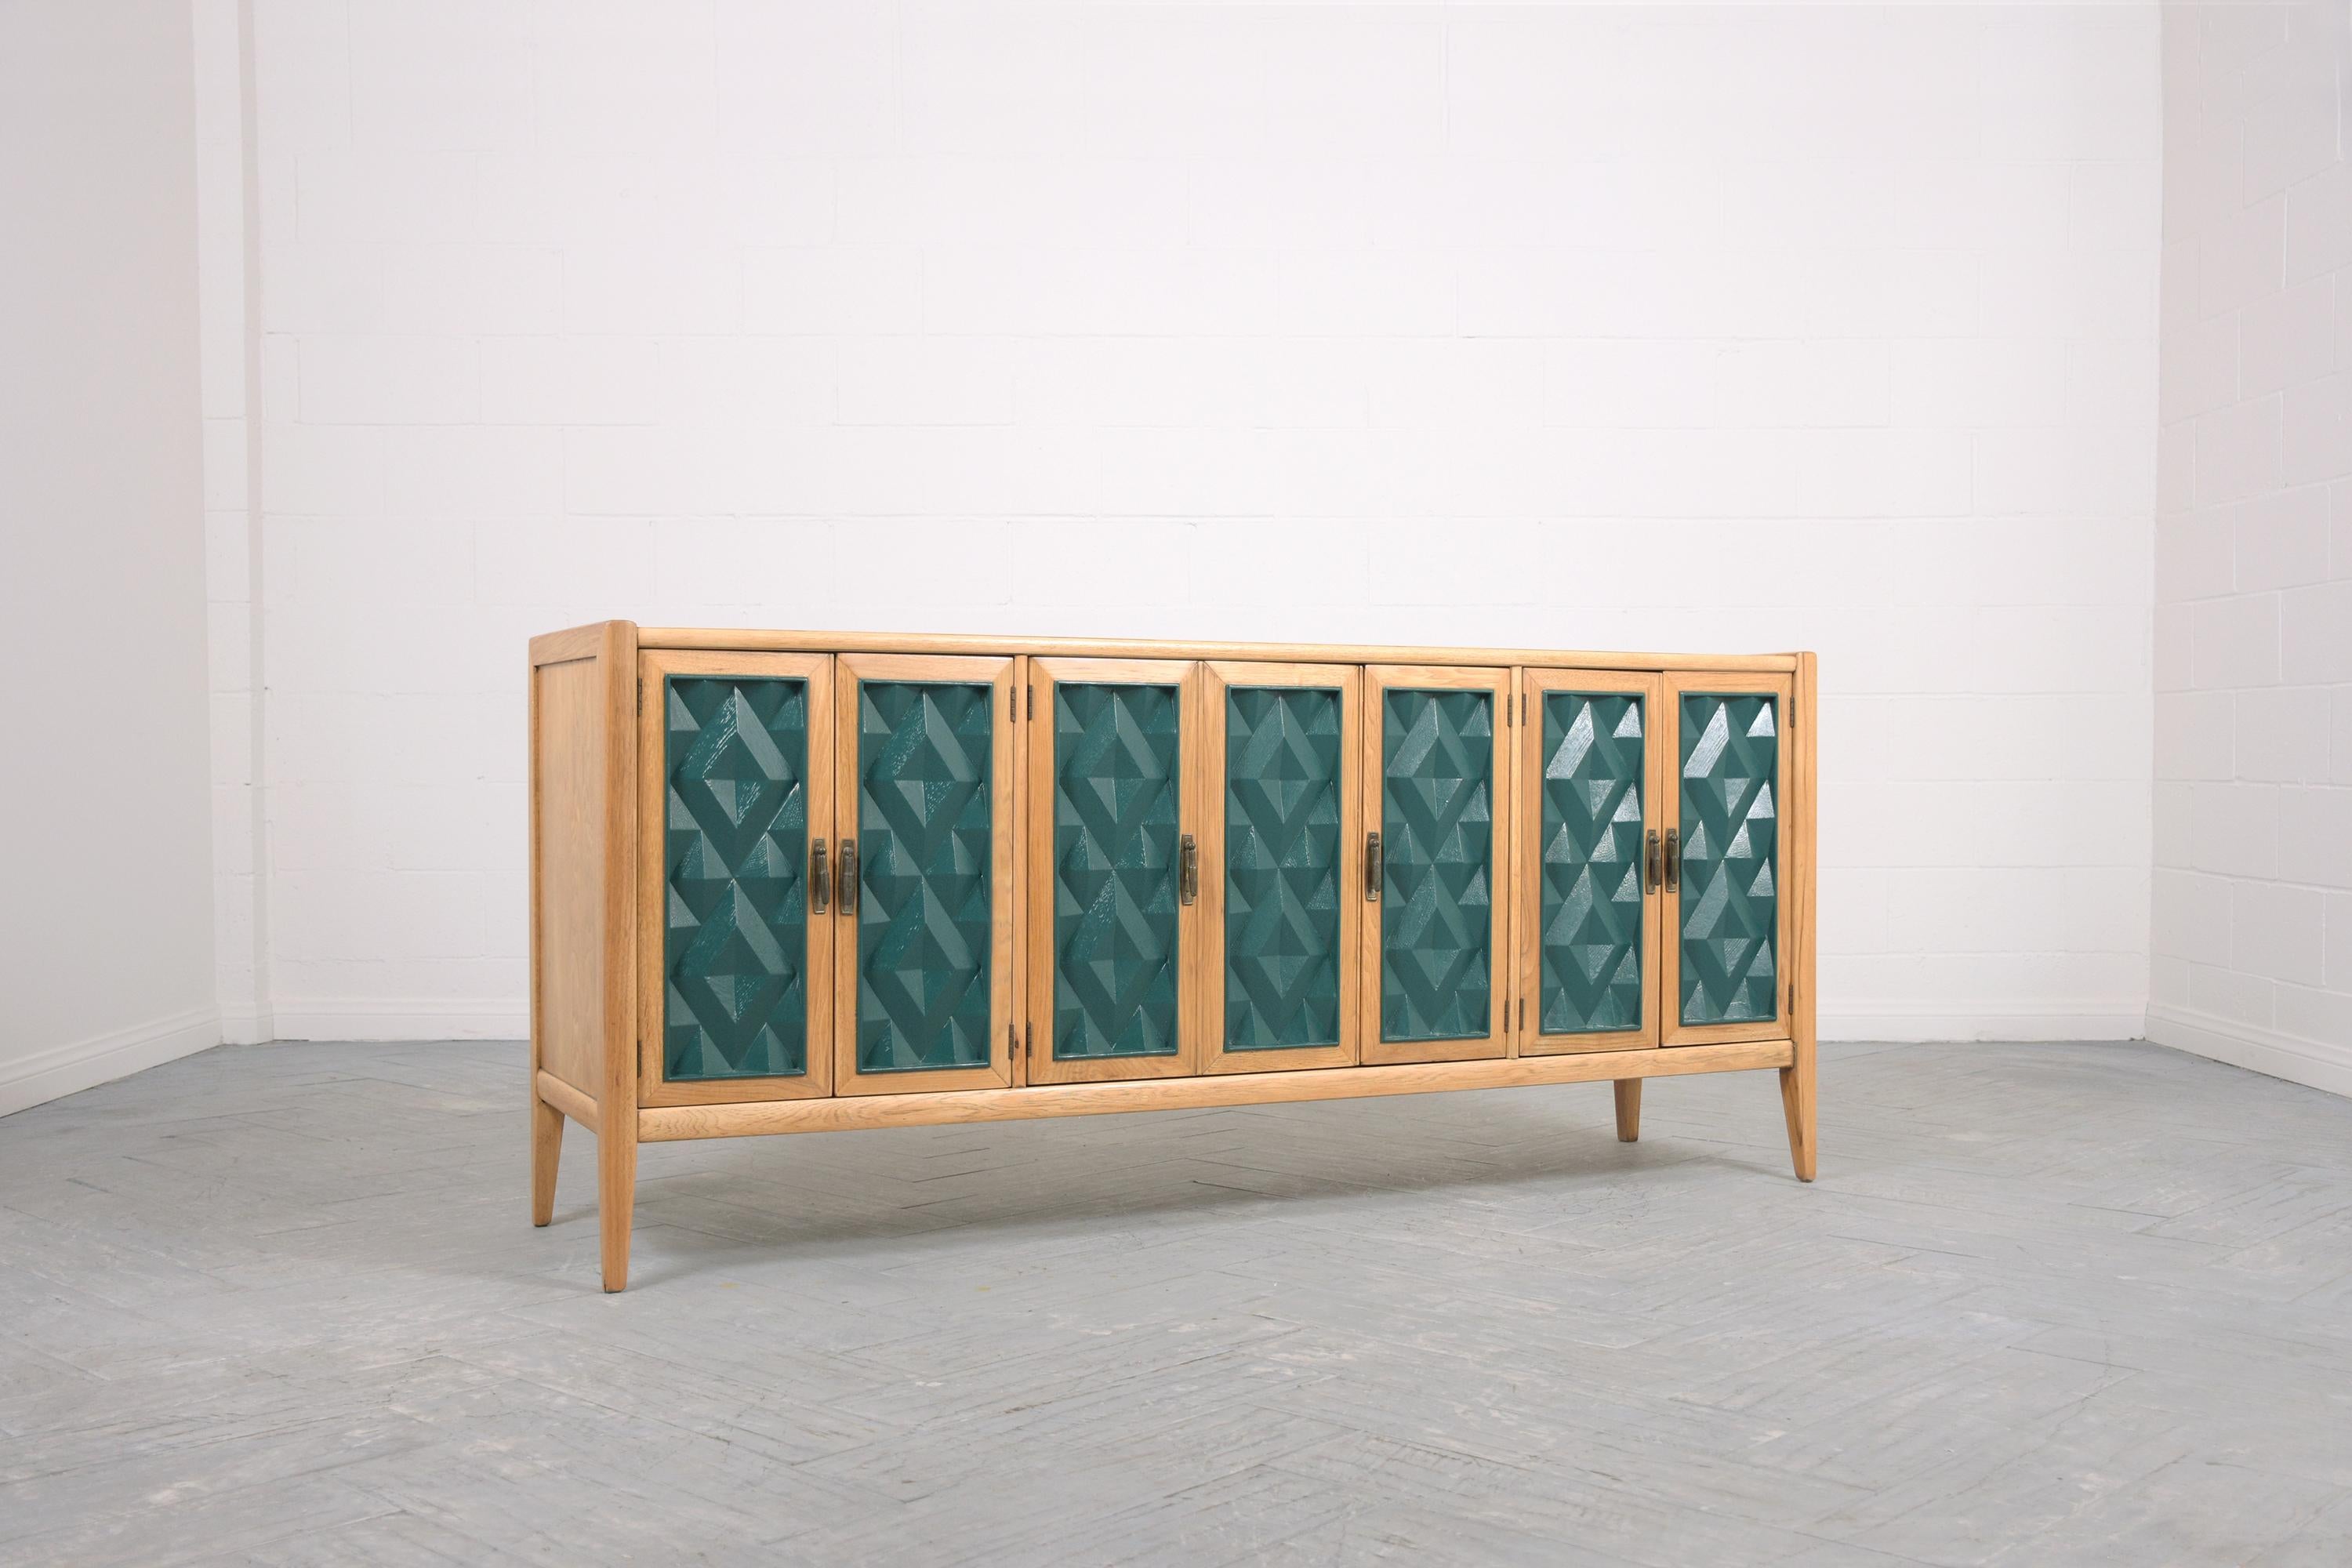 1960s Mid-Century Modern Green Diamond Panel Cabinet in Lacquered Walnut For Sale 1